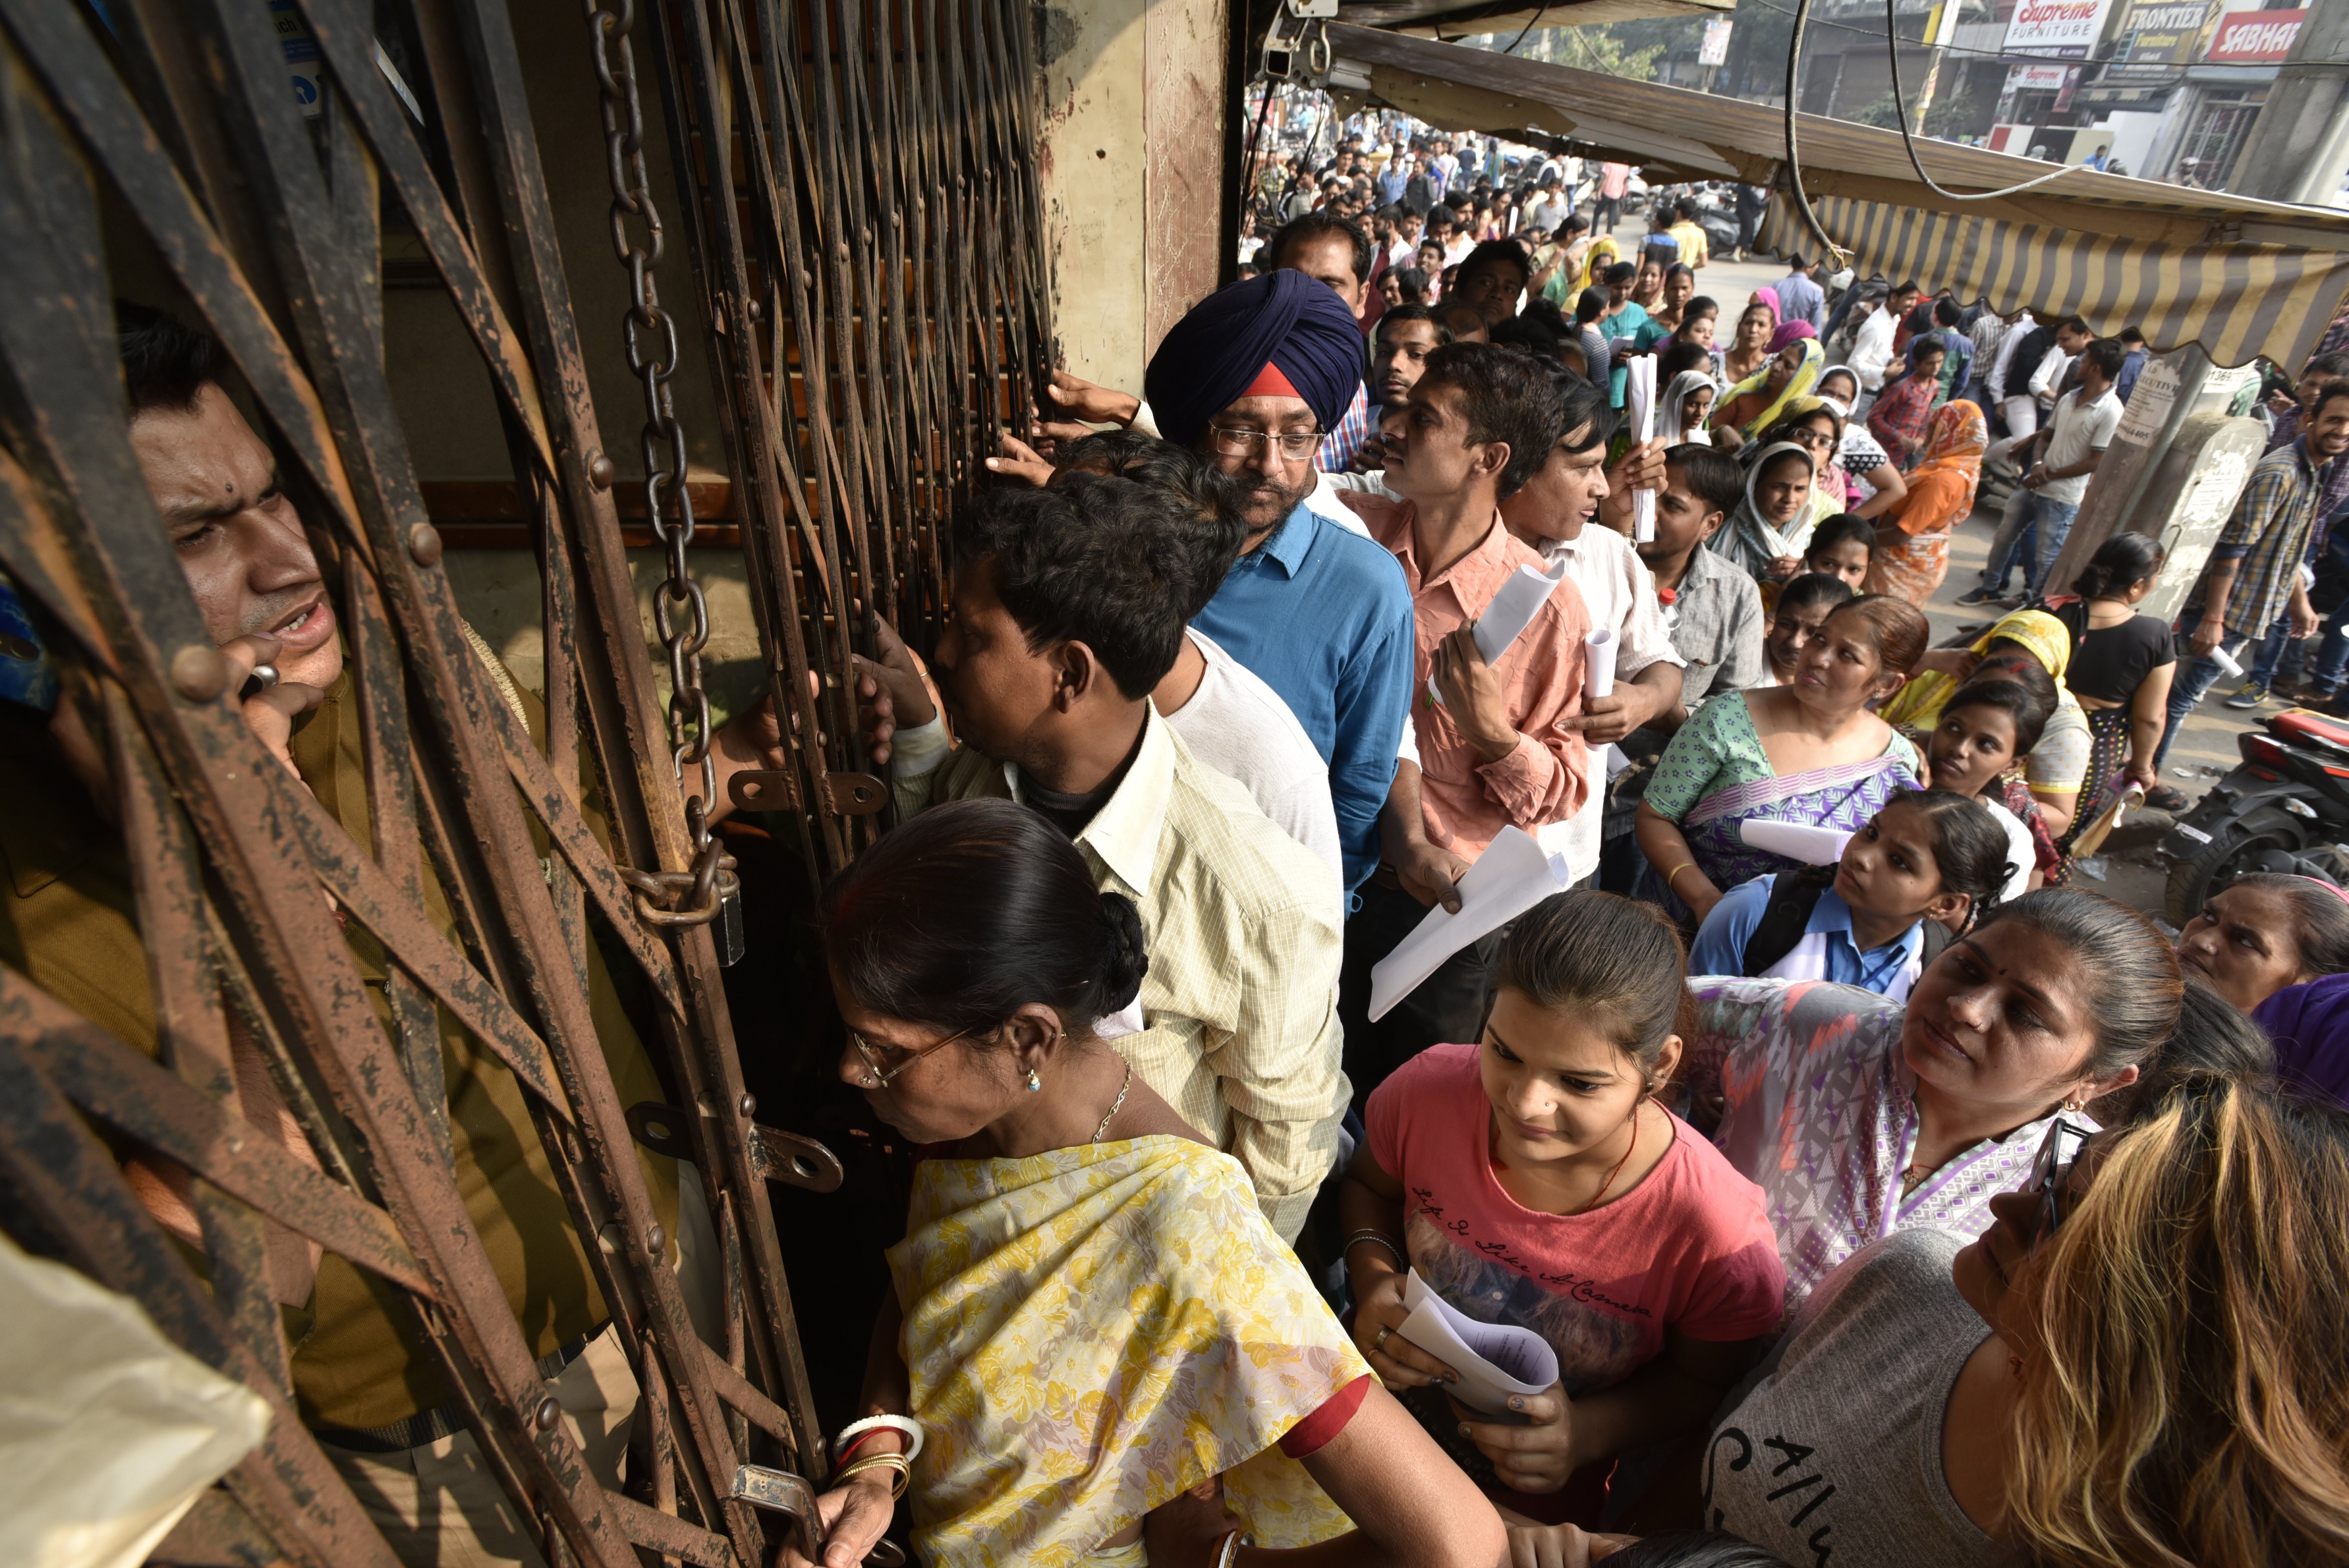 Long queue in front of the state Bank of India near Mahila Colony  Gandhi Nagar east Delhi for new currency  on November 10, 2016 in New Delhi, India. (Arvind Yadav—Hindustan Times/Getty Images)